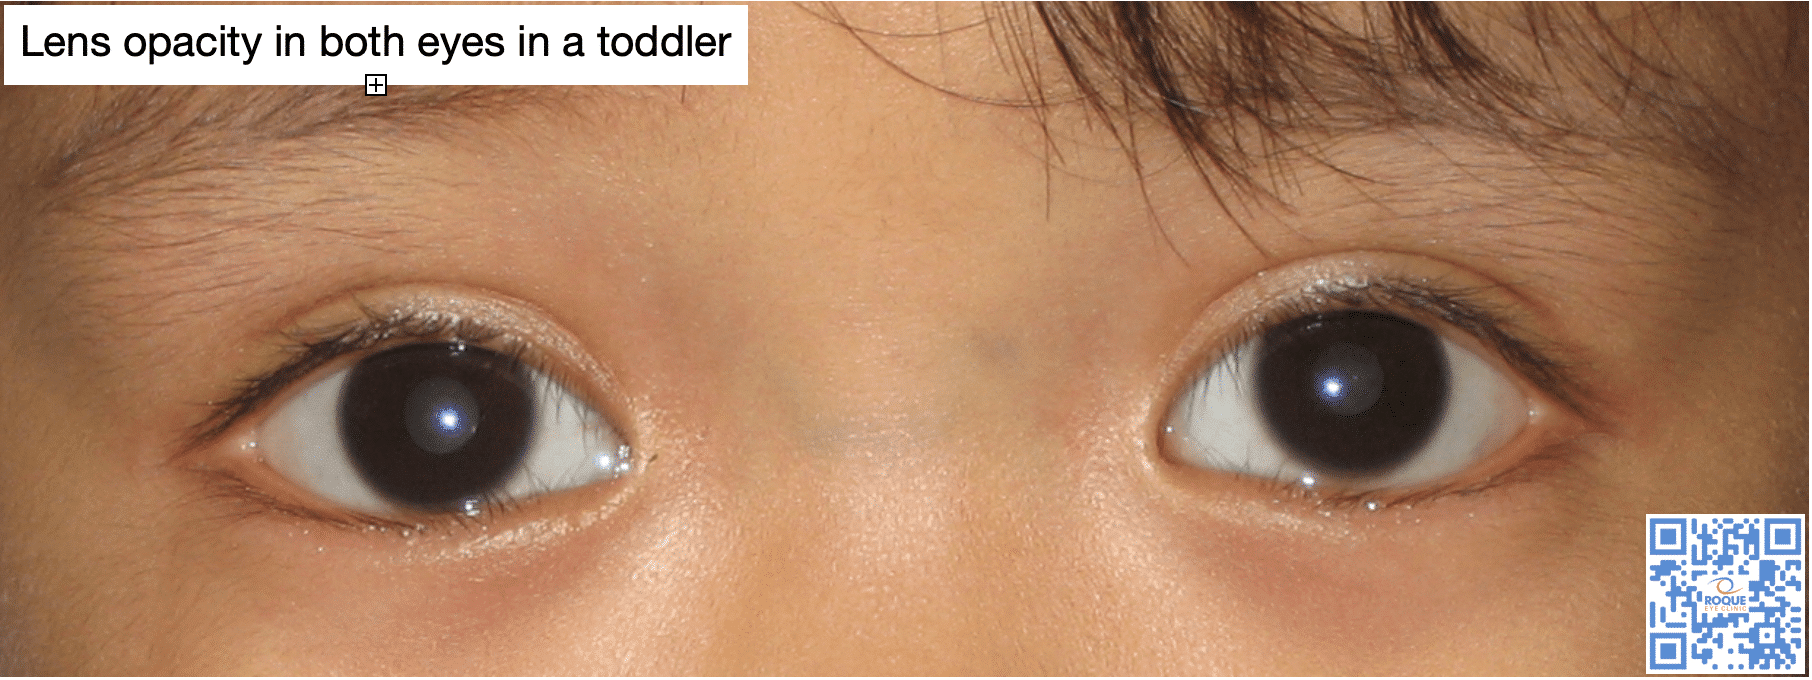 Bilateral lens opacity in a toddler